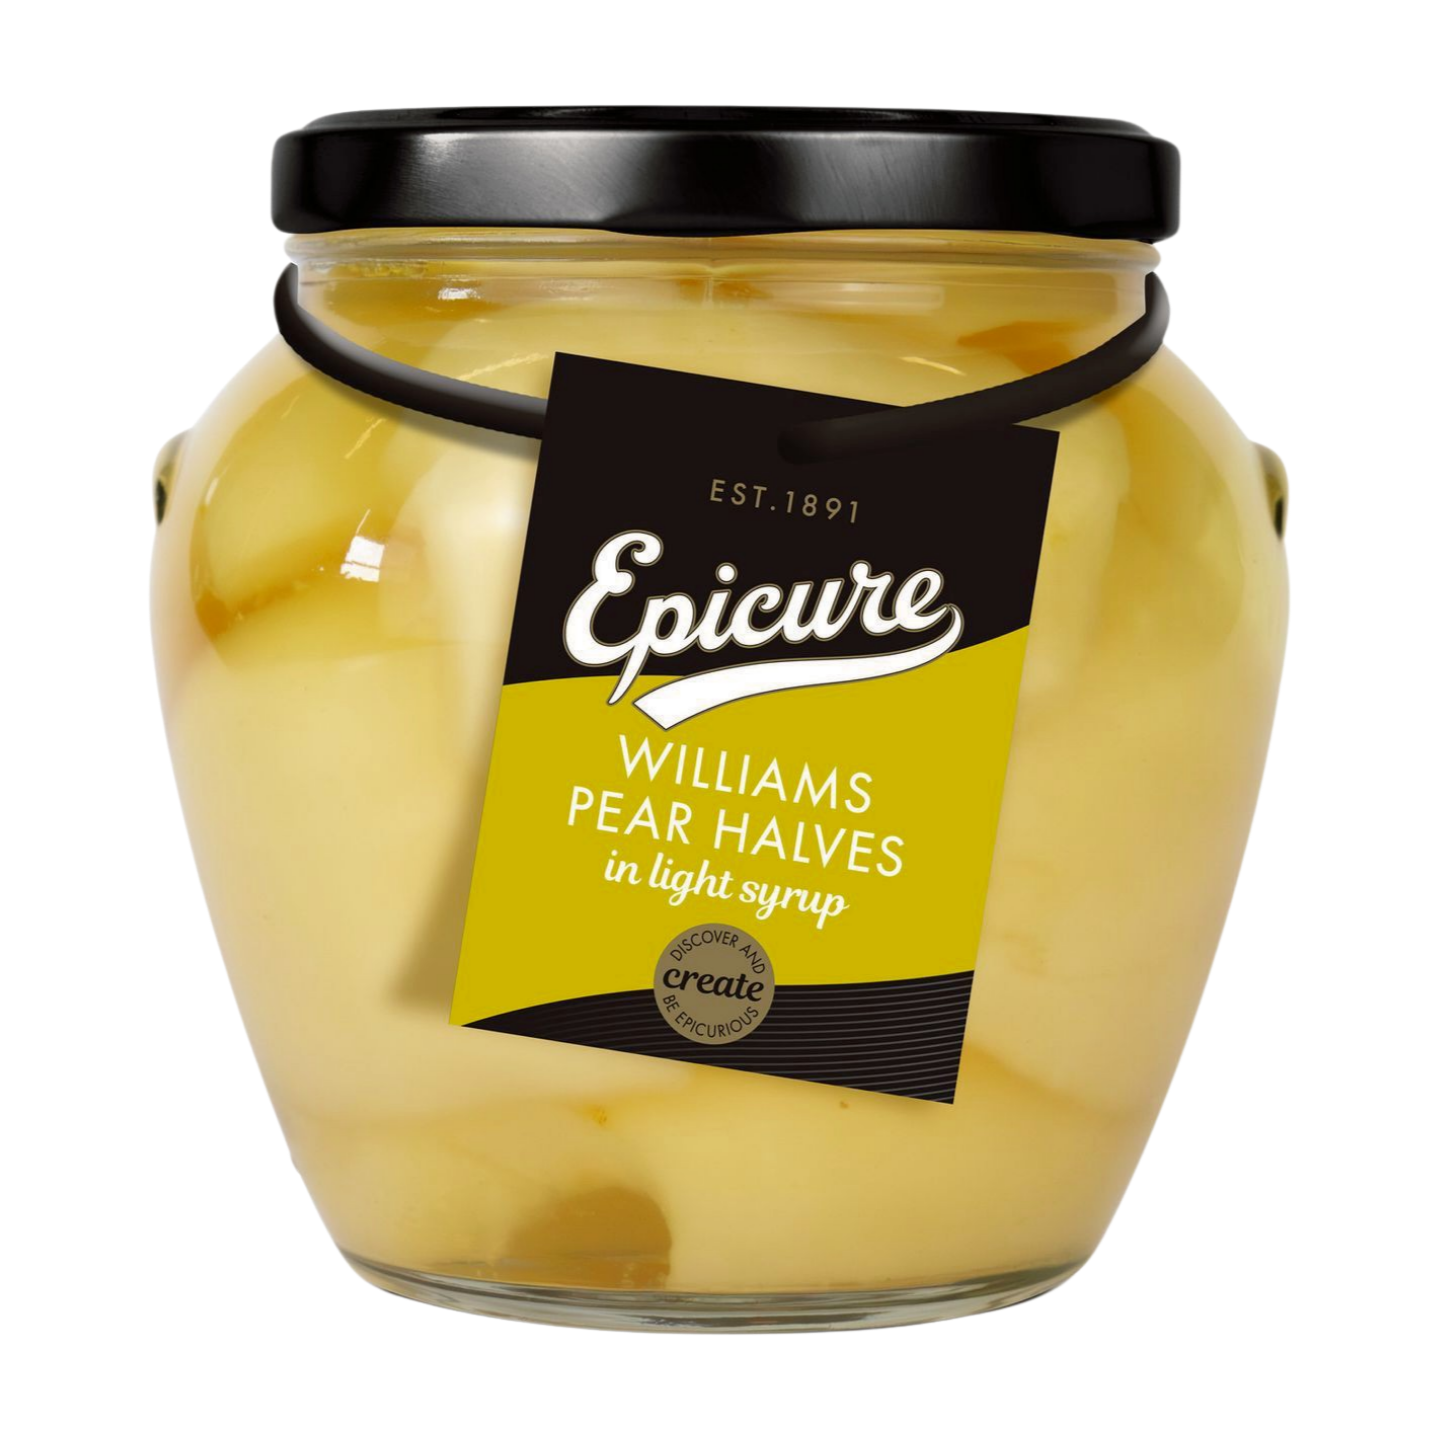 Epicure Williams Pear Halves in Light Syrup (540g)